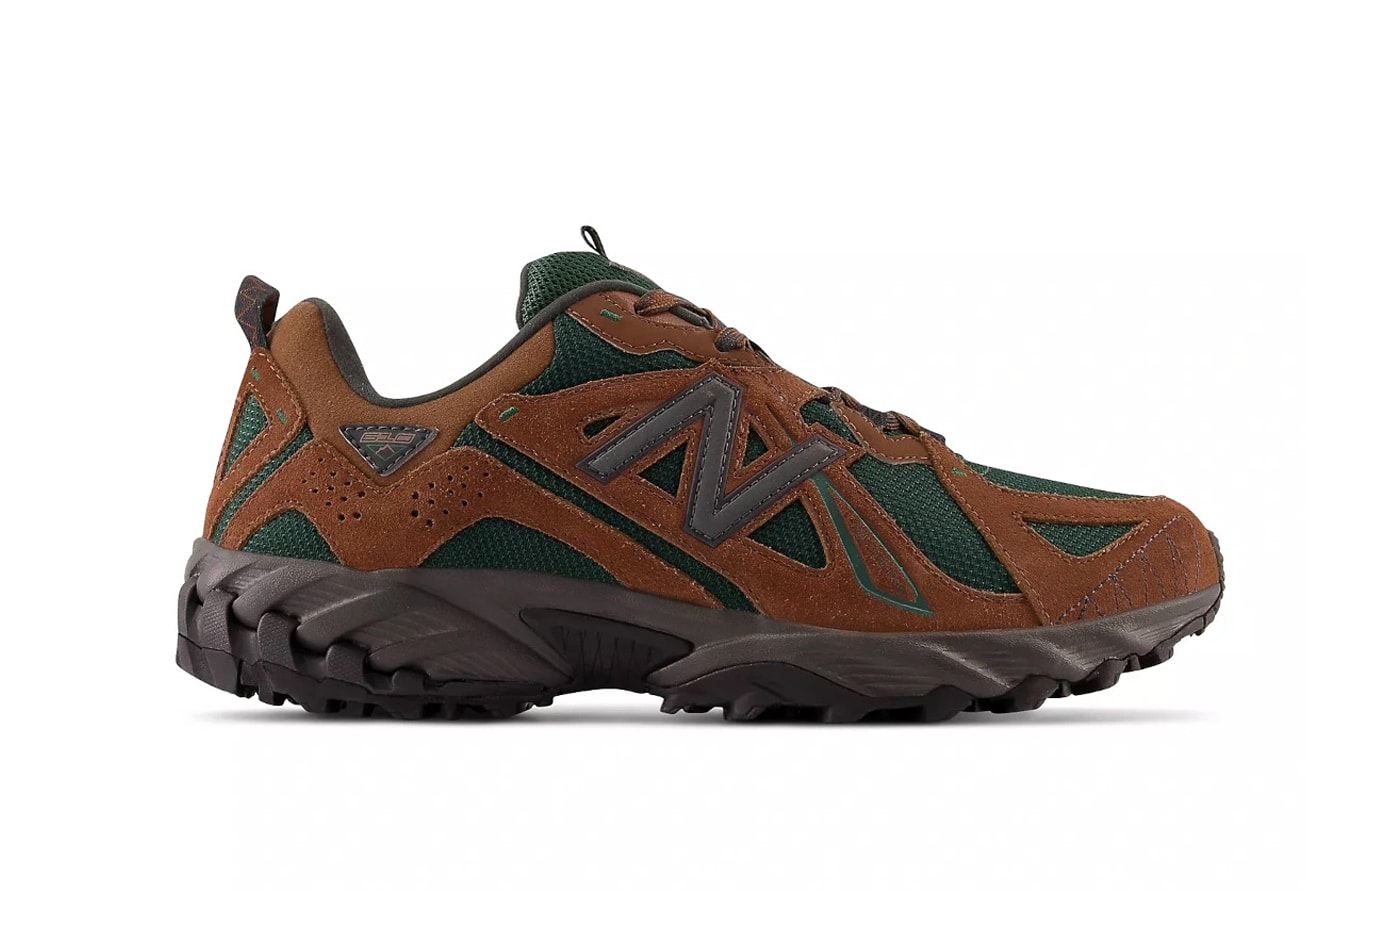 New Balance 610 Arrives in "Beef and Broccoli" Colorway ML610TBG True brown / Nightwatch Green / Blacktop march spring 2023 